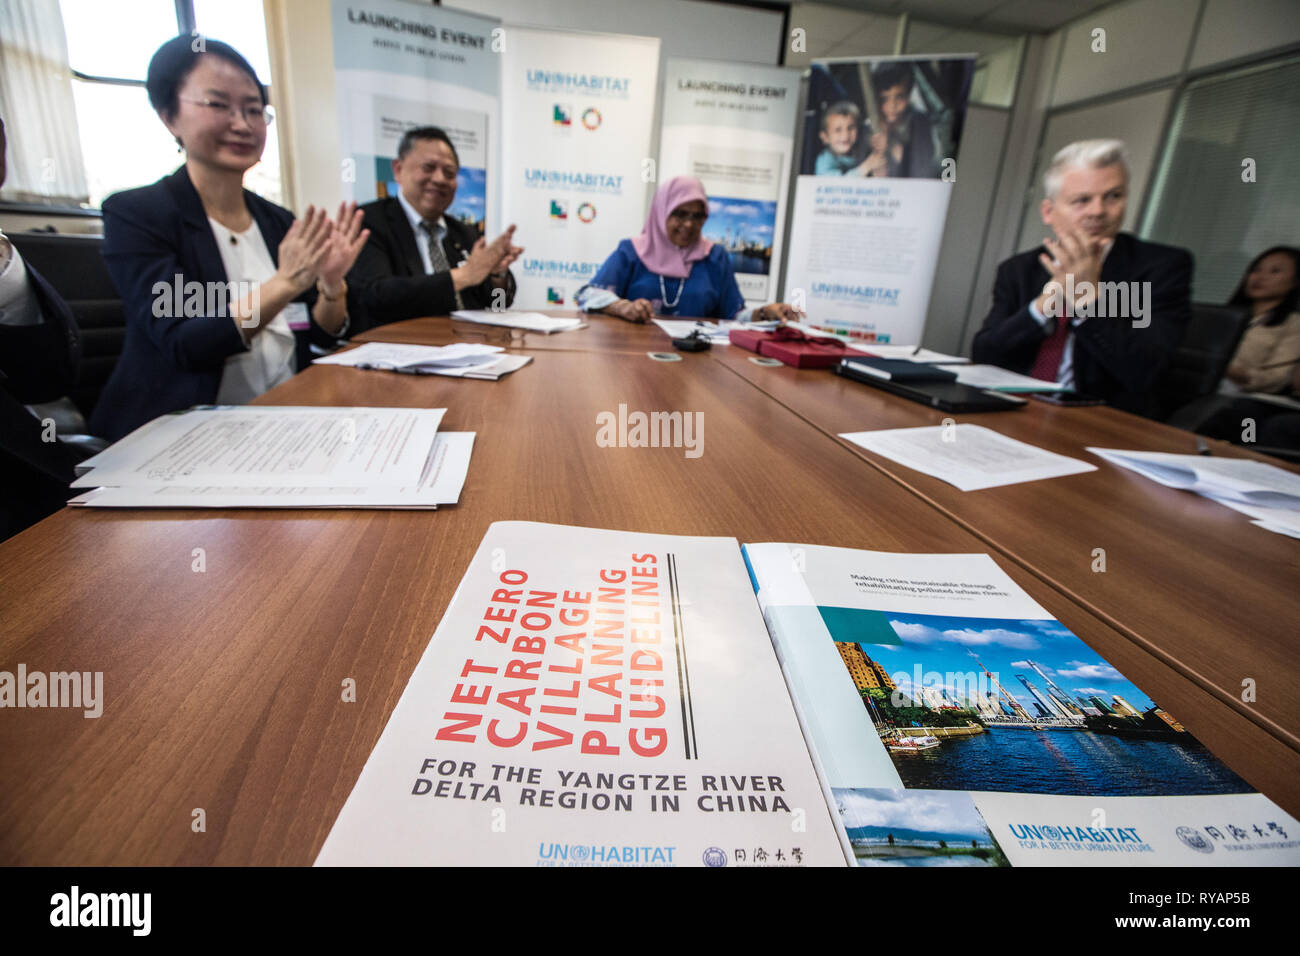 (190313) -- NAIROBI, March 13, 2019 (Xinhua) -- Photo taken on March 12, 2019 shows the launch of a publication titled 'Making cities sustainable through rehabilitating polluted urban rivers: Lessons from China and other countries', which was co-authored by the UN Human Settlement Programme (UN-Habitat) and China's Tongji University, in Nairobi, Kenya. The publication was launched on the sidelines of the fourth session of the UN Environment Assembly (UNEA4) underway in Nairobi.The UN-Habitat has also partnered with Tongji University to develop a net zero carbon village guideline for China's Ya Stock Photo